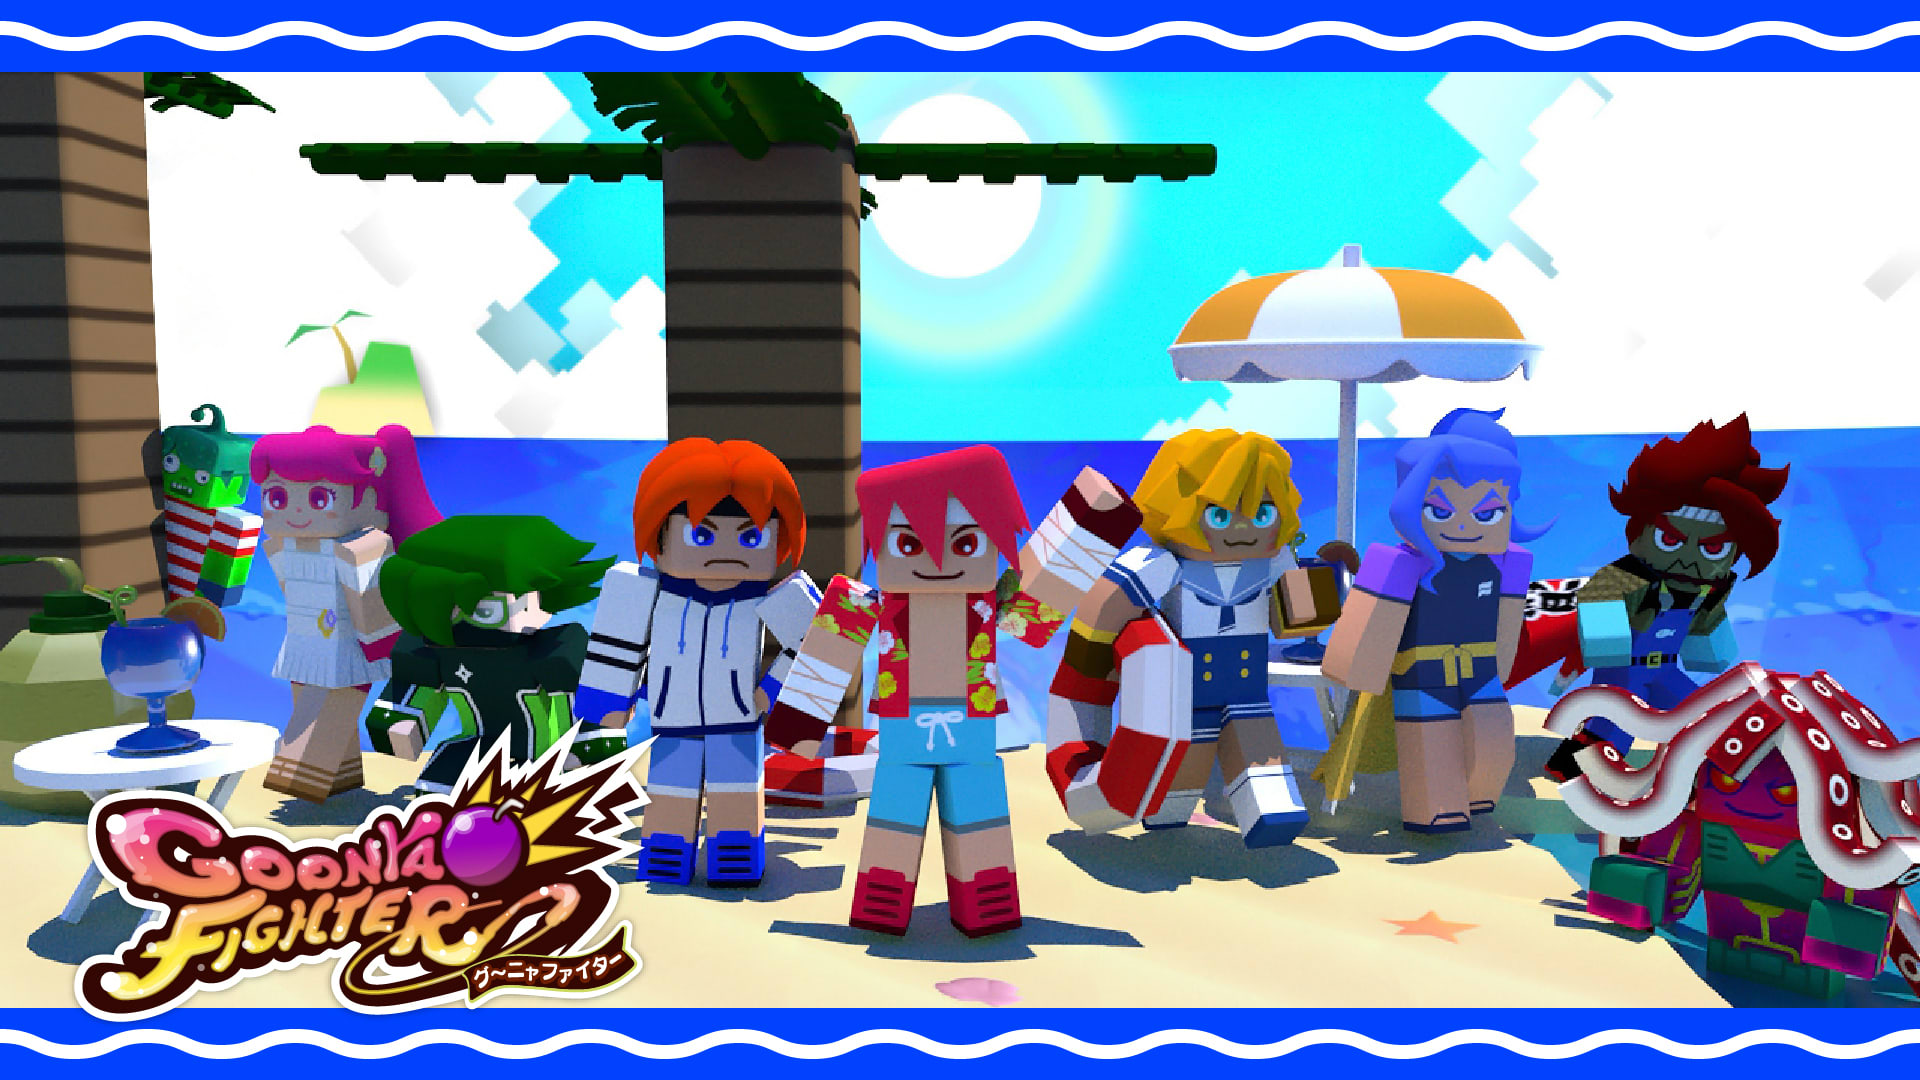 Additional skin: All character skins (Summer Vacation ver.)